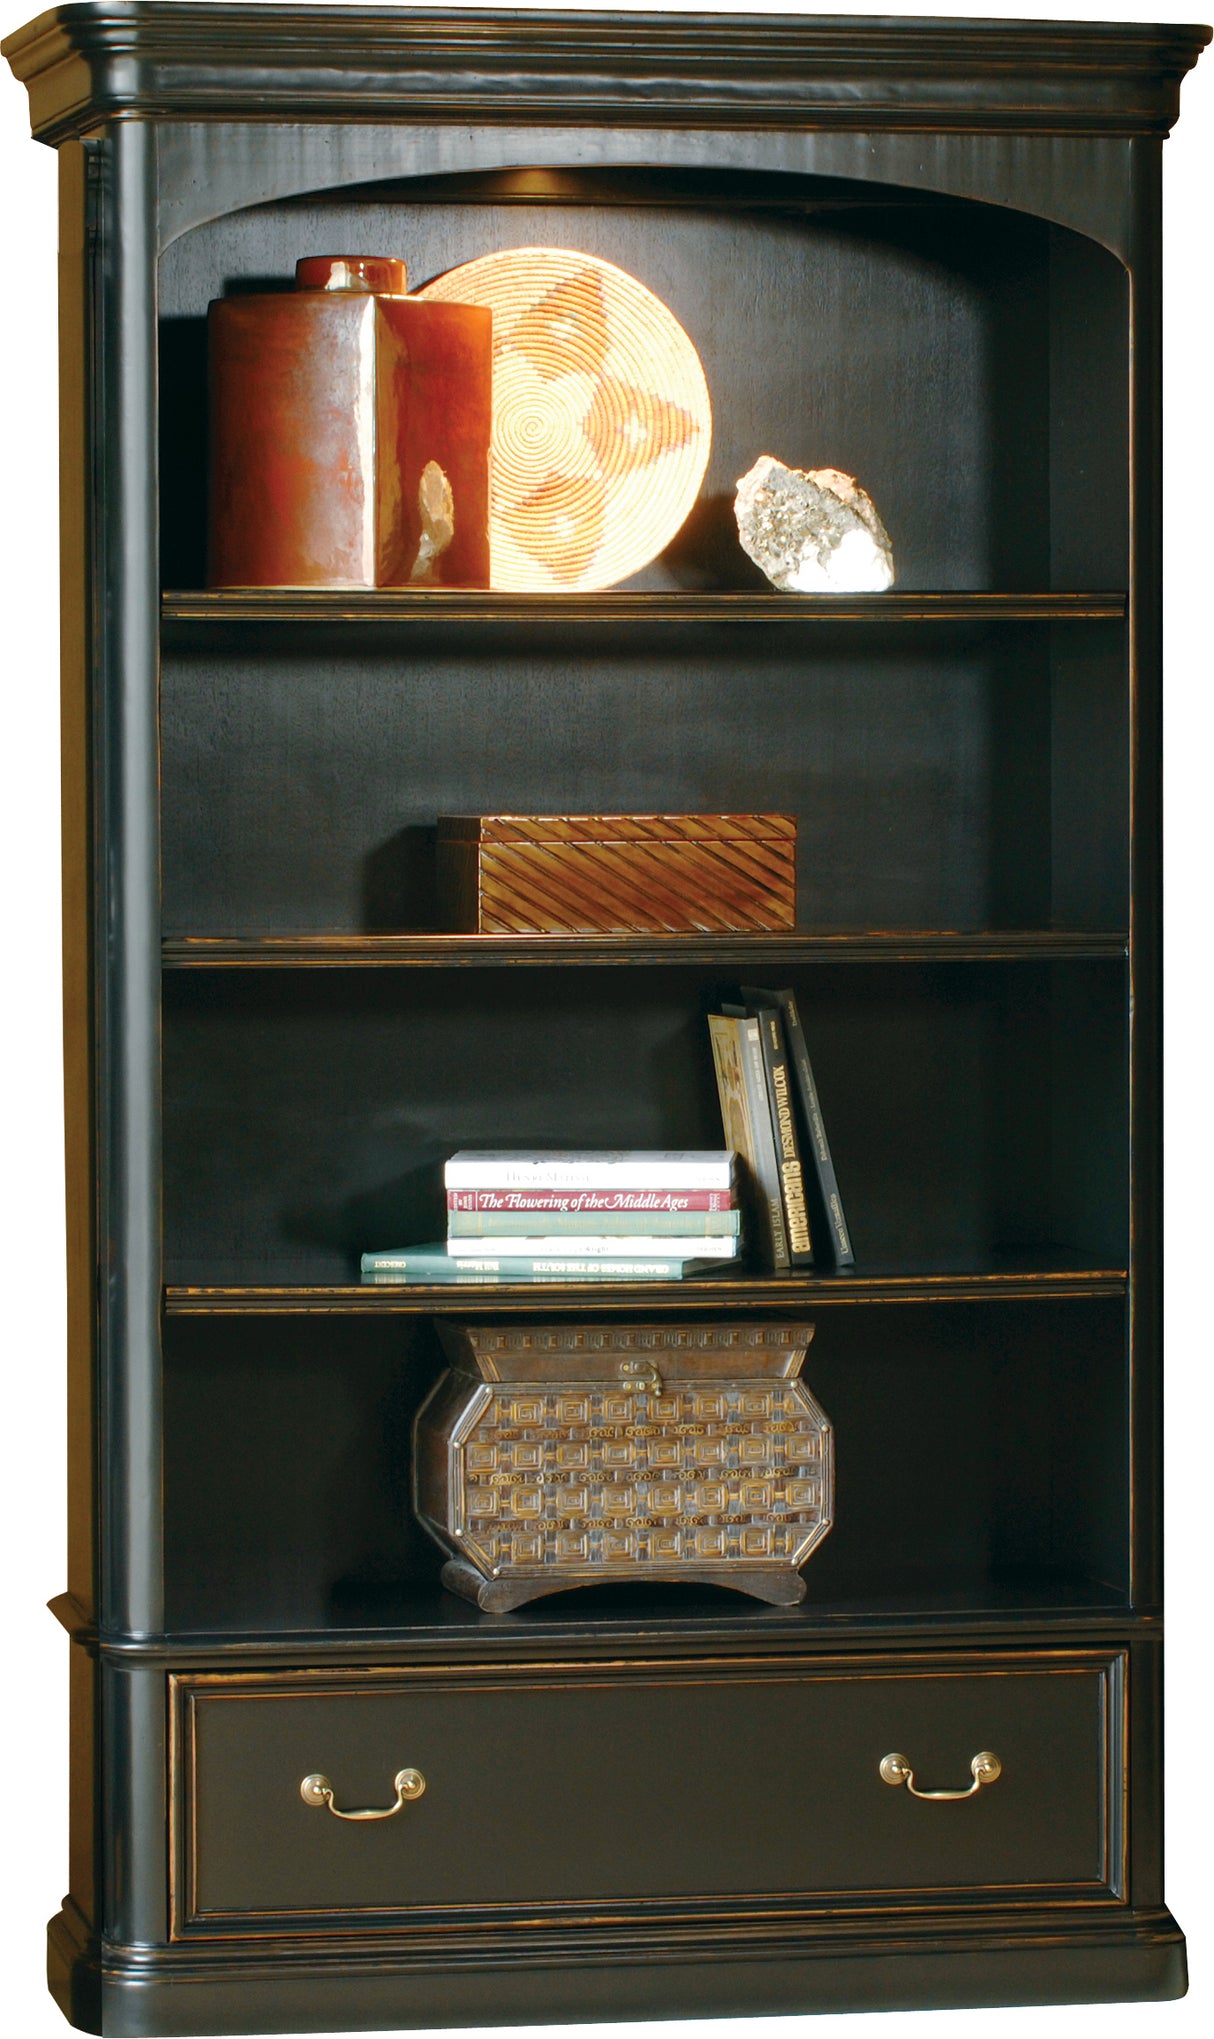 Hekman 79144 Louis Philippe 50in. x 20in. x 84in. Executive Center Bookcase